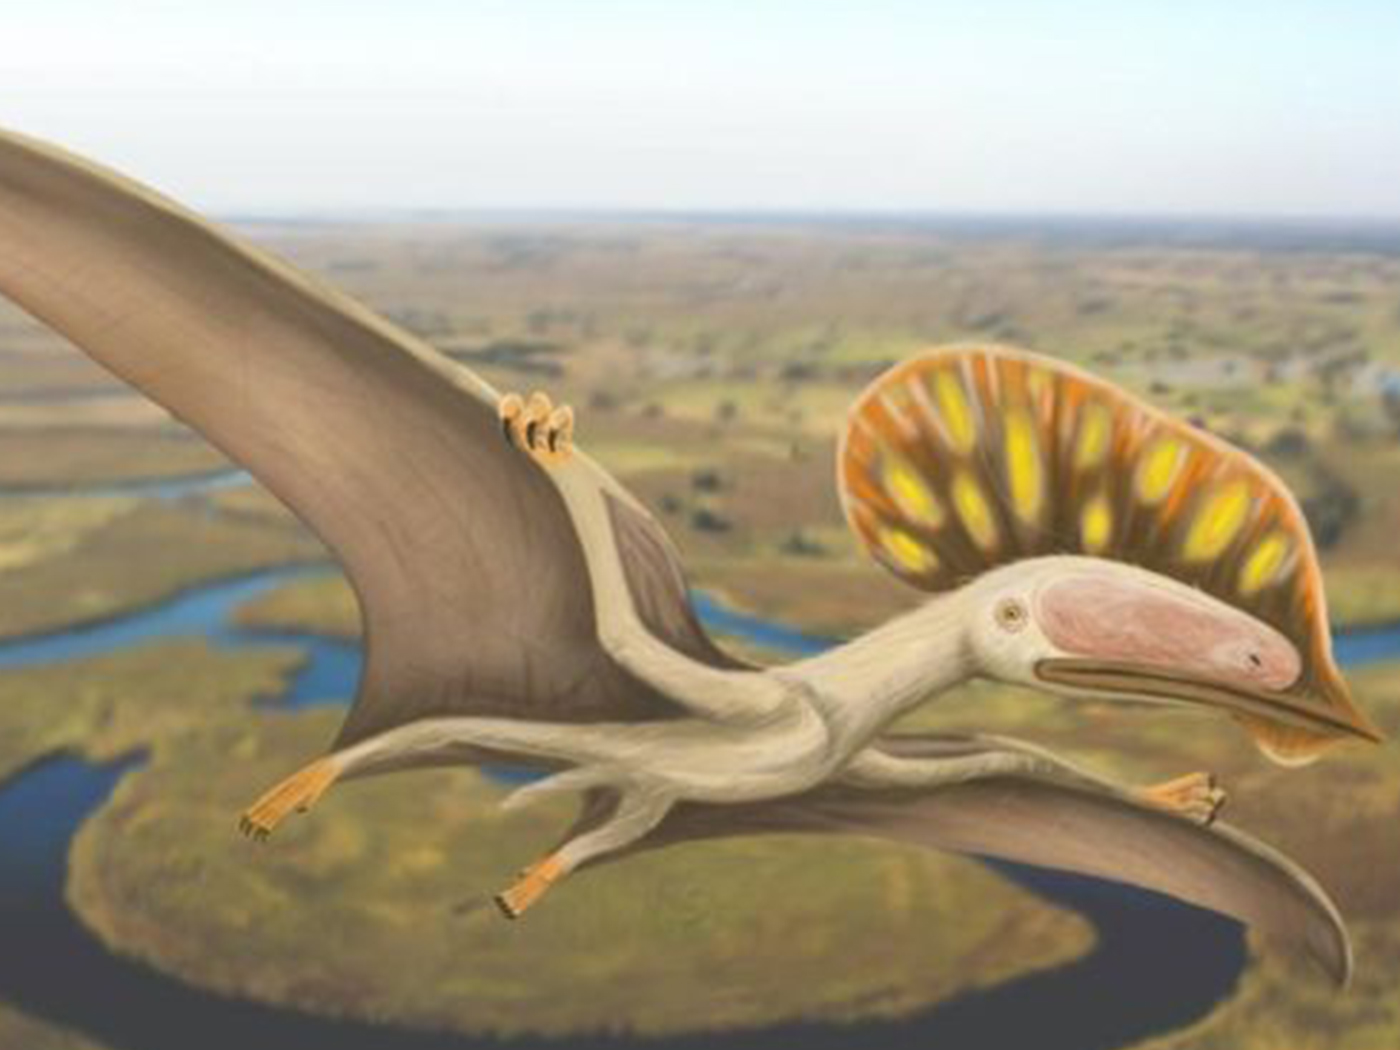 PDF] A New Crested Pterosaur from the Early Cretaceous of Spain: The First  European Tapejarid (Pterodactyloidea: Azhdarchoidea)